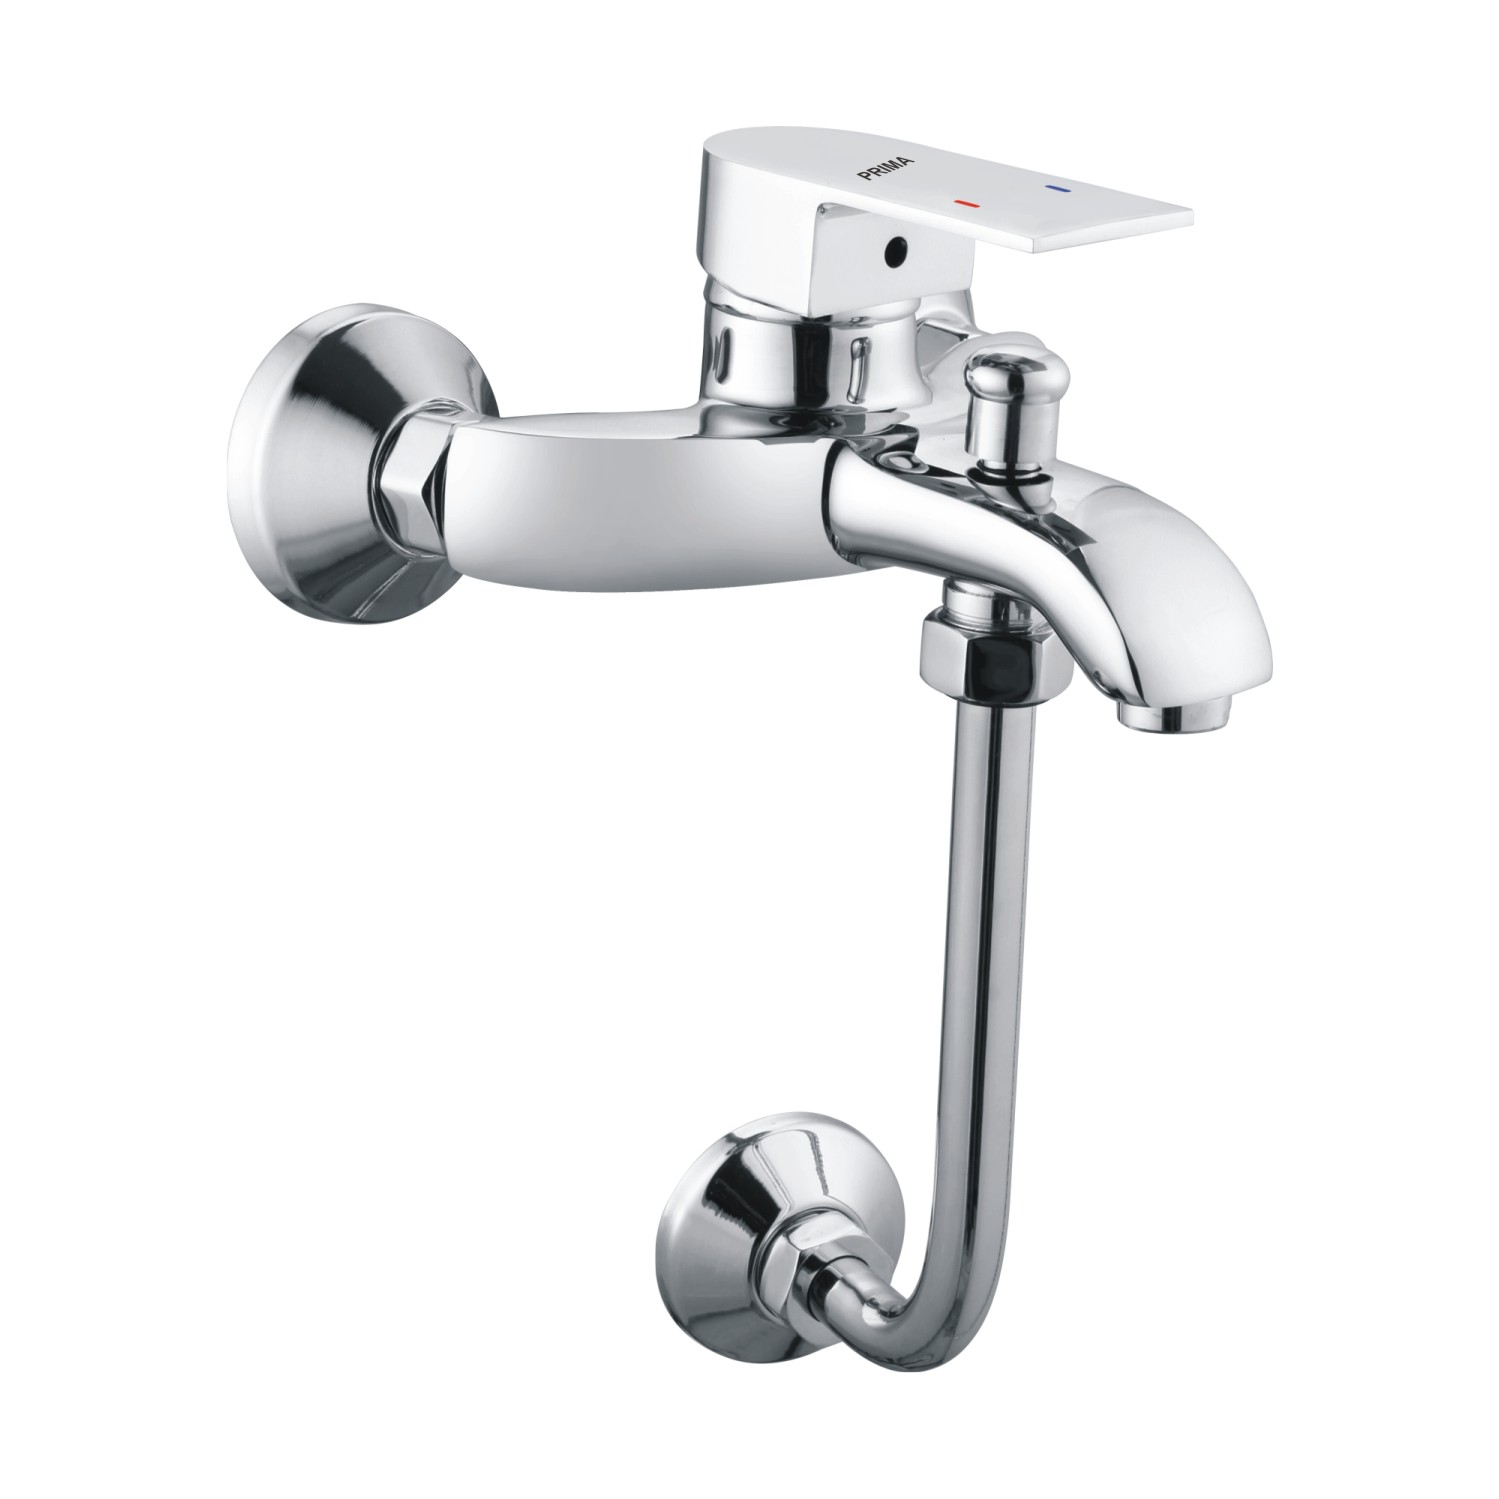 C.P Single Lever Wall Mixer with L Bend